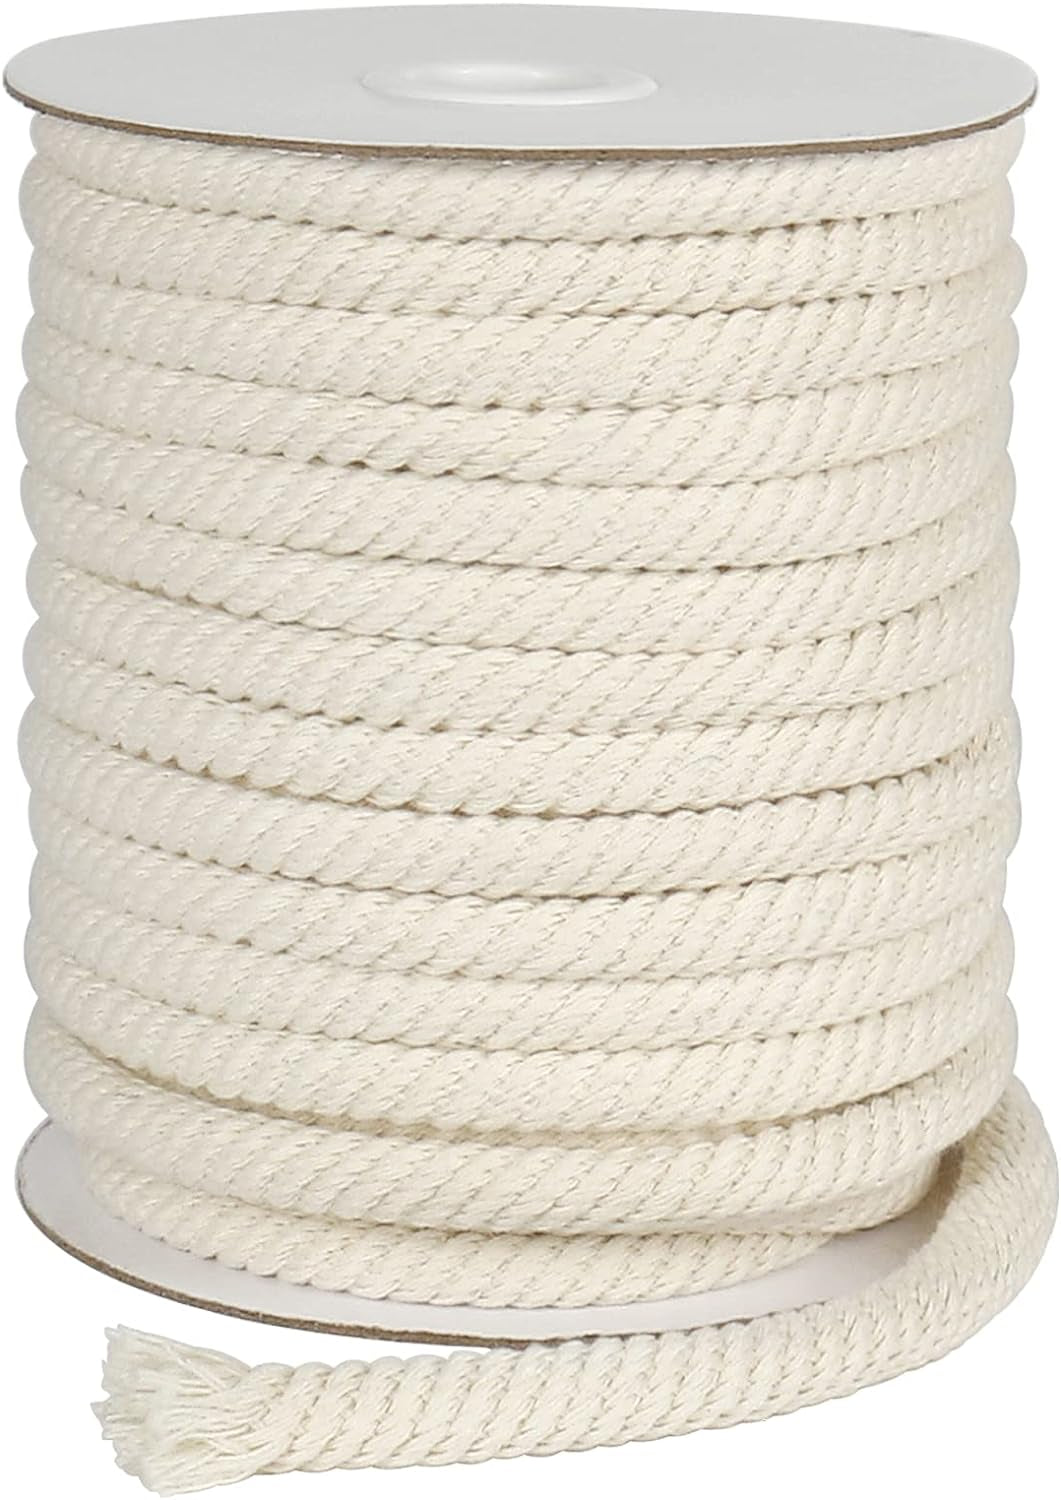 5Mm Macrame Cord, 165Feet Braided Cotton Rope Thick Craft Twine for Macrame Plant Hangers, Wall Hangings, Drawstrings, Dream Catchers, DIY Crafts (Beige)